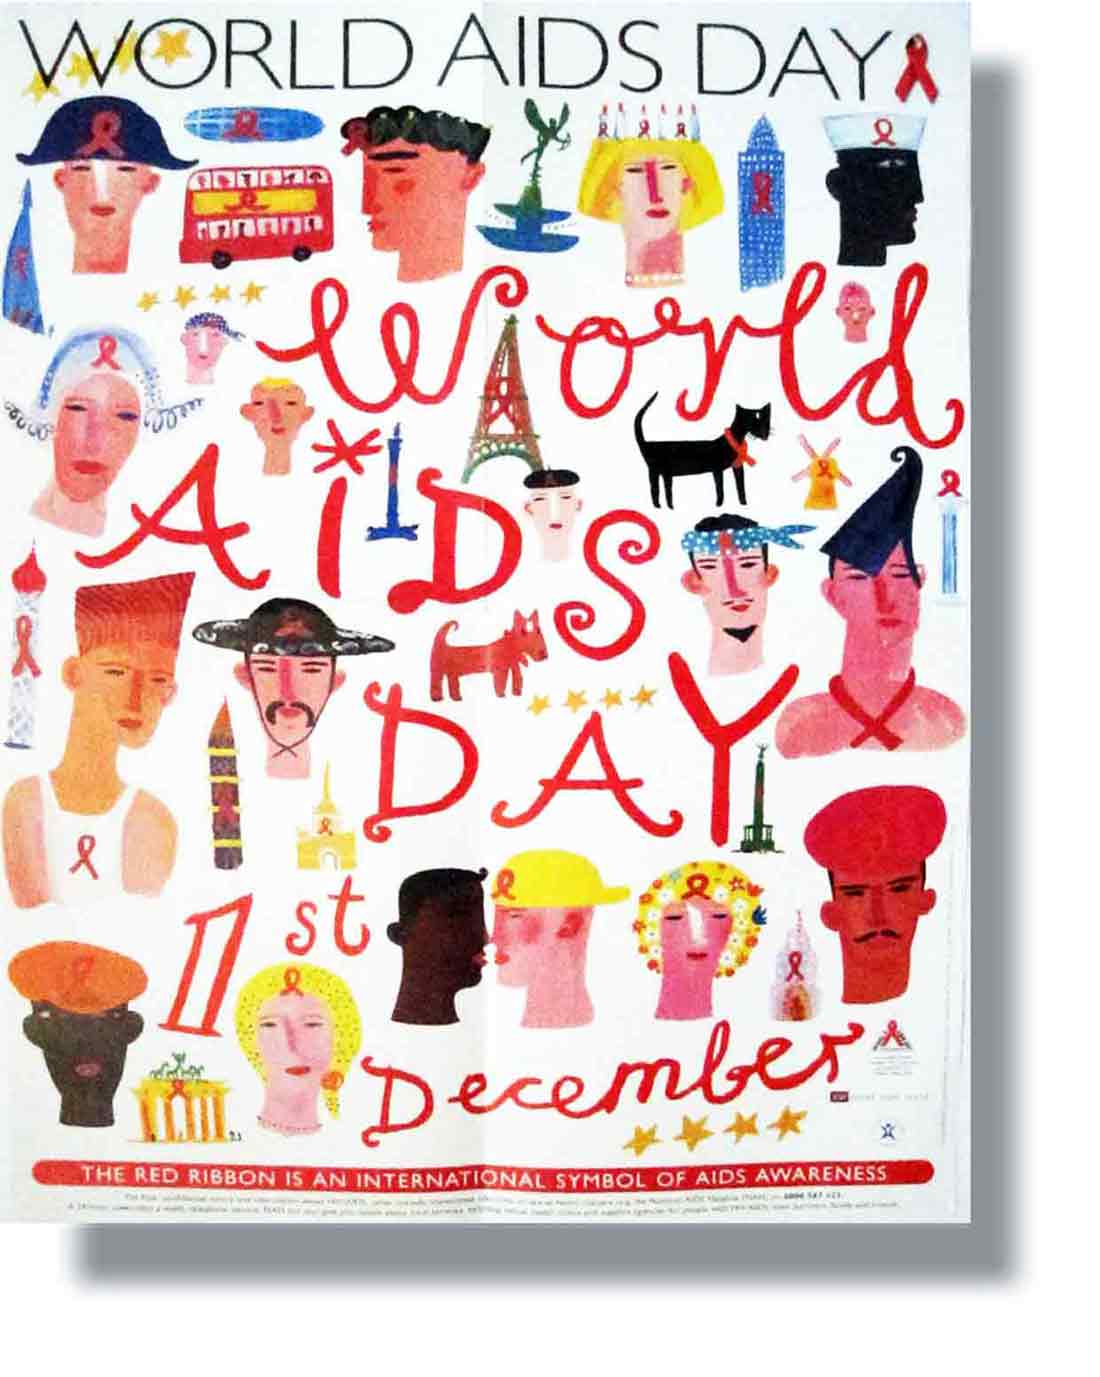 World Aids Day Poster designed by ideology.uk.com with illustrations by Chris Corr